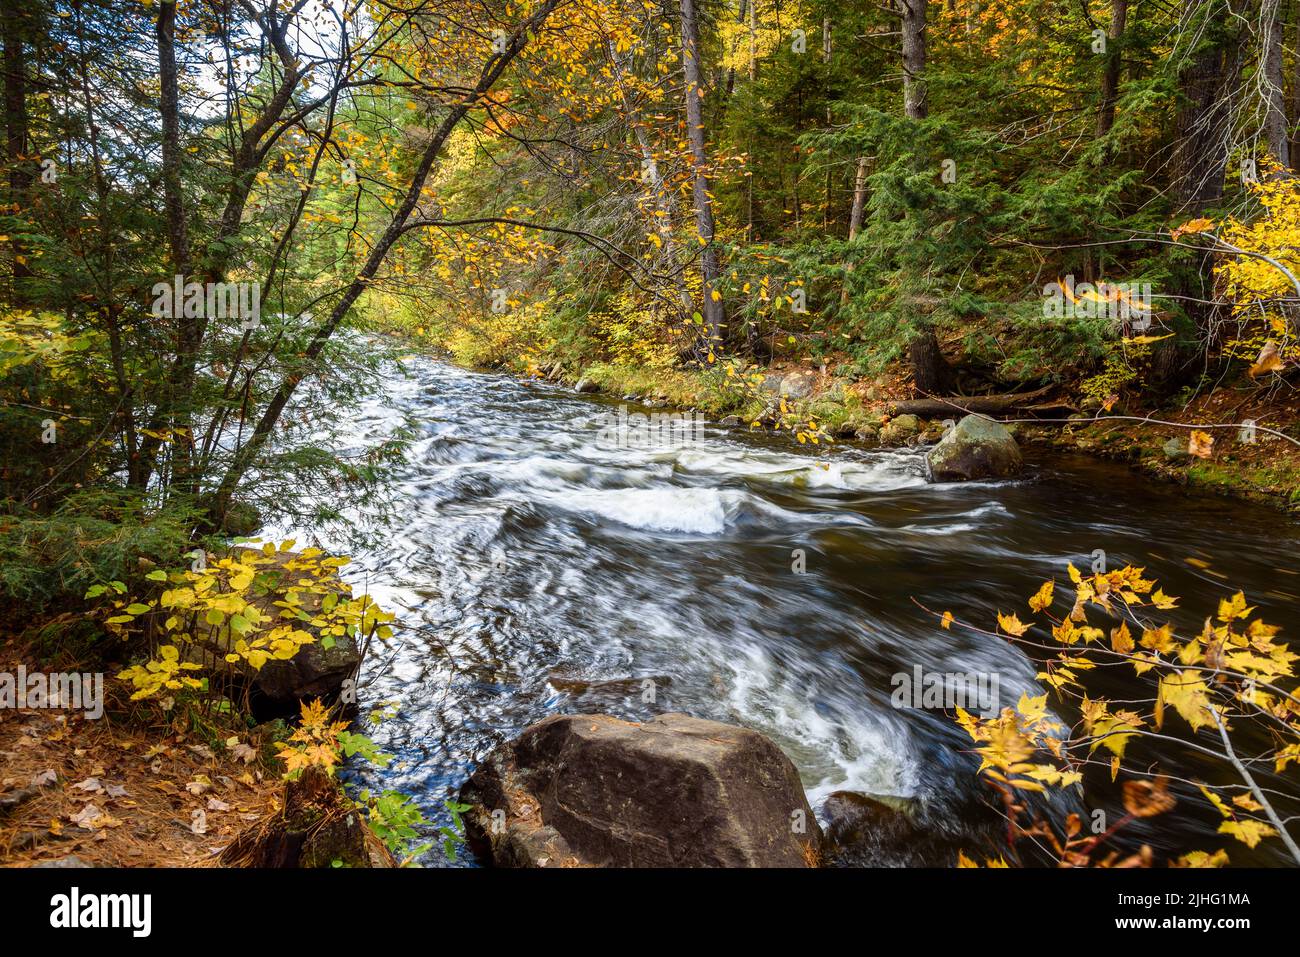 Rapids along a river through a colourful forest in autumn Stock Photo